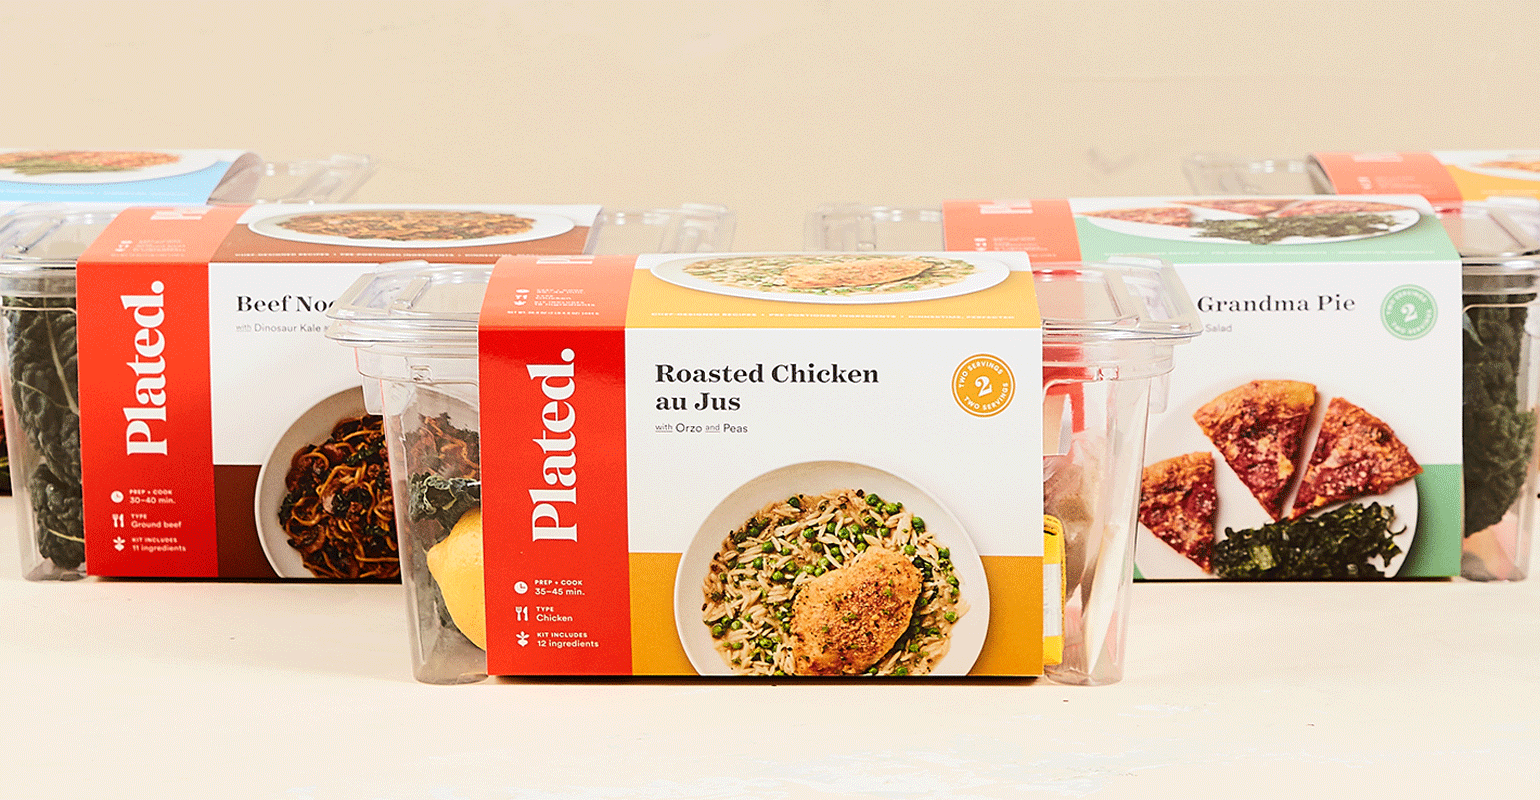 Albertsons, Plated launch national retail rollout